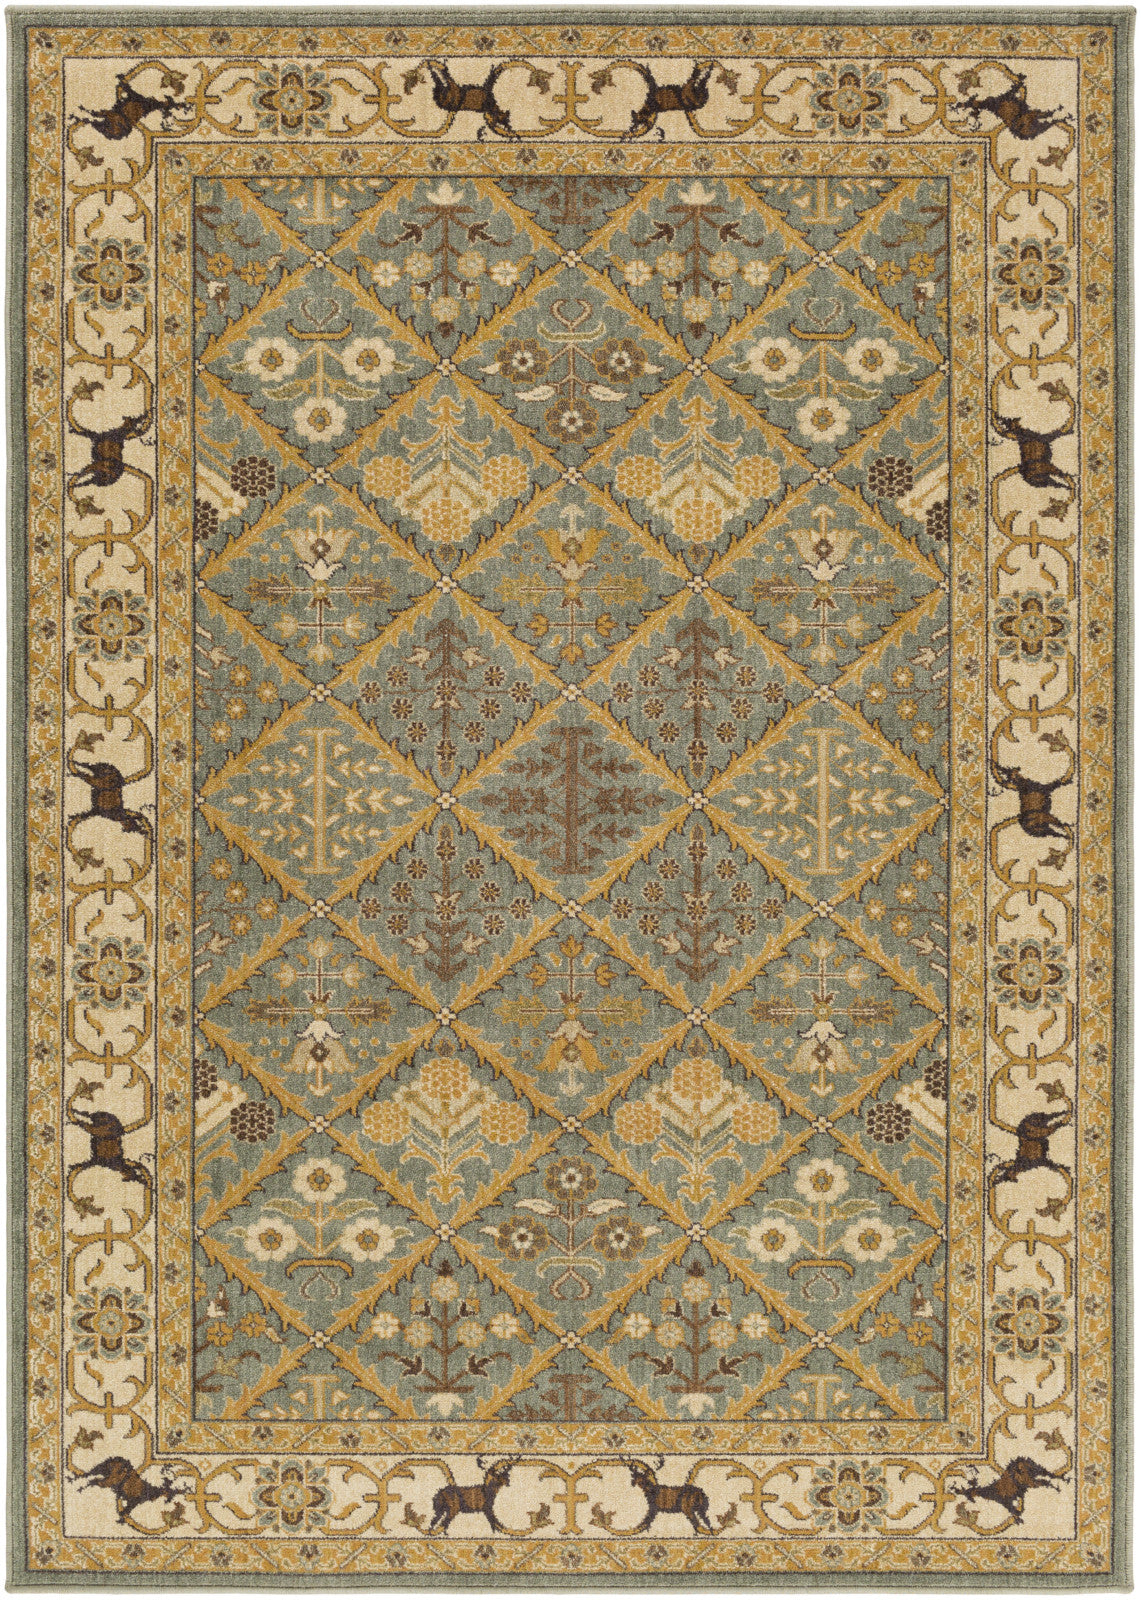 Surya Willow Lodge WLL-1007 Green Area Rug by Mossy Oak main image